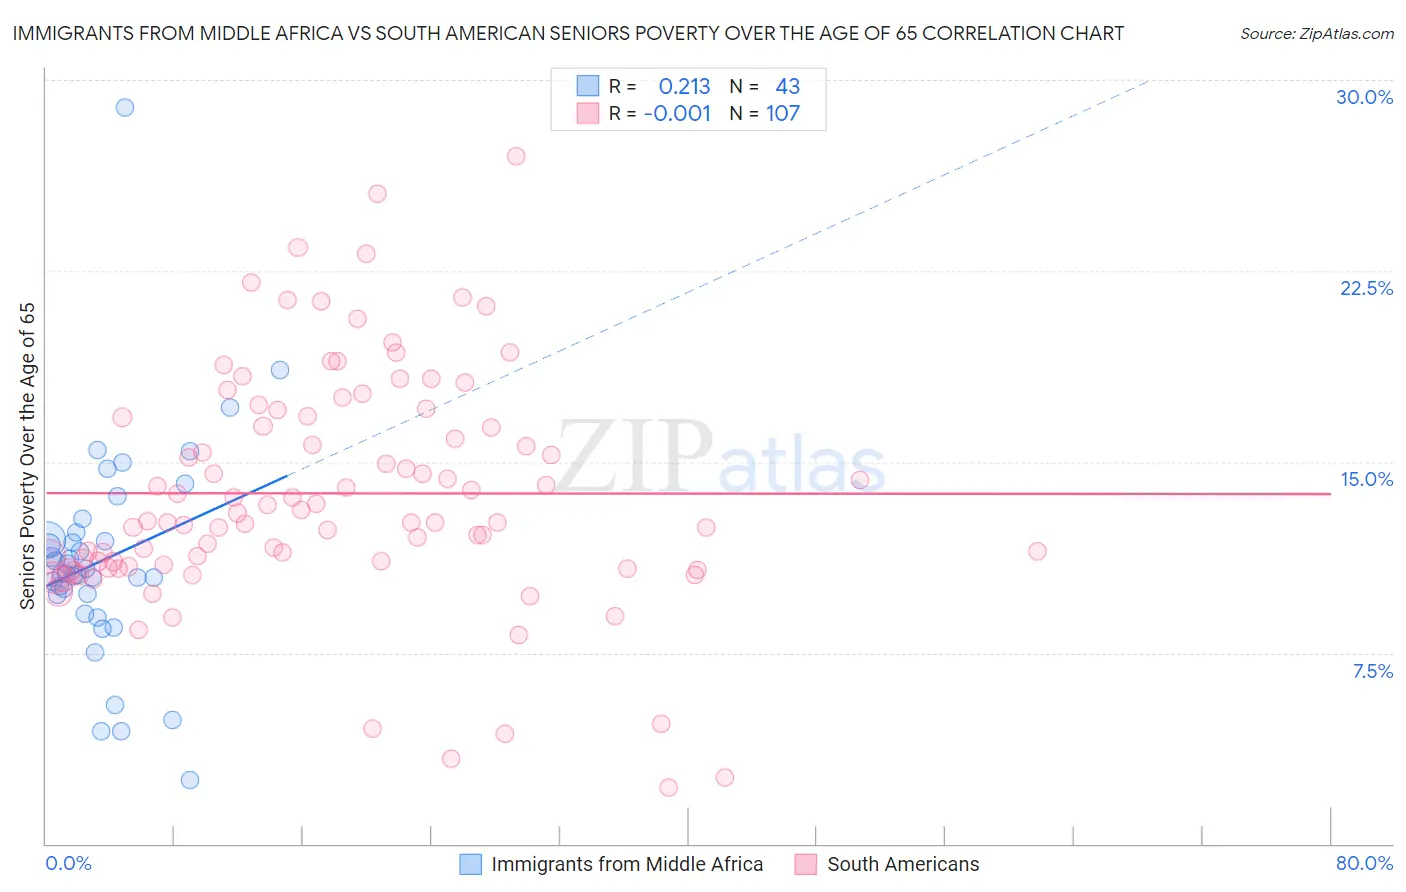 Immigrants from Middle Africa vs South American Seniors Poverty Over the Age of 65